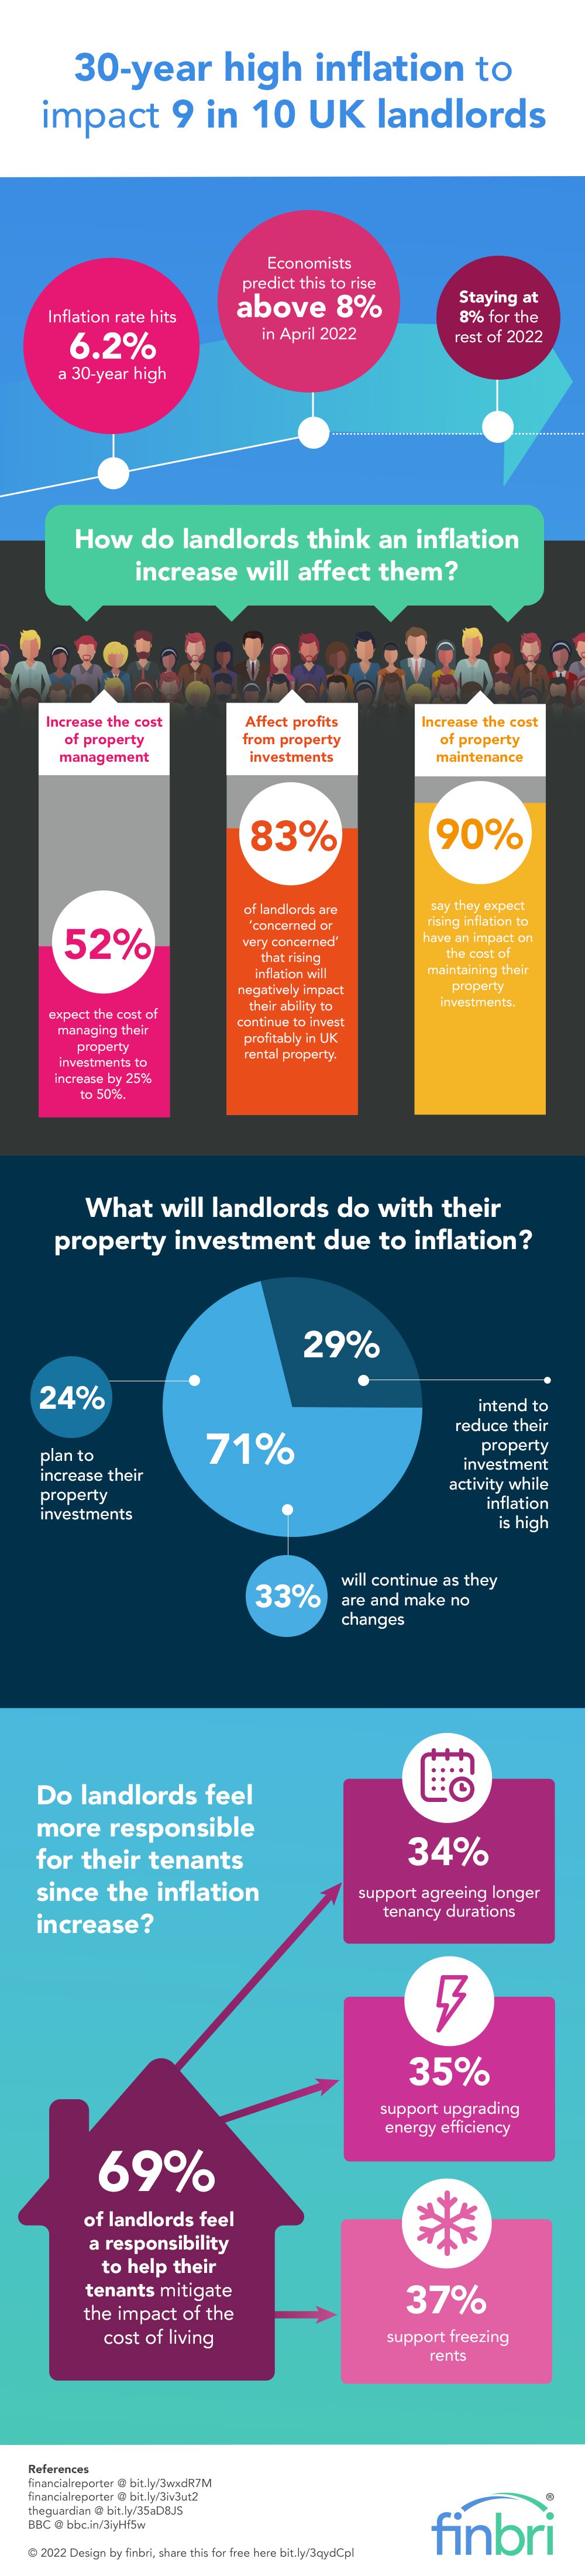 30-year high inflation to impact 9 in 10 UK landlords